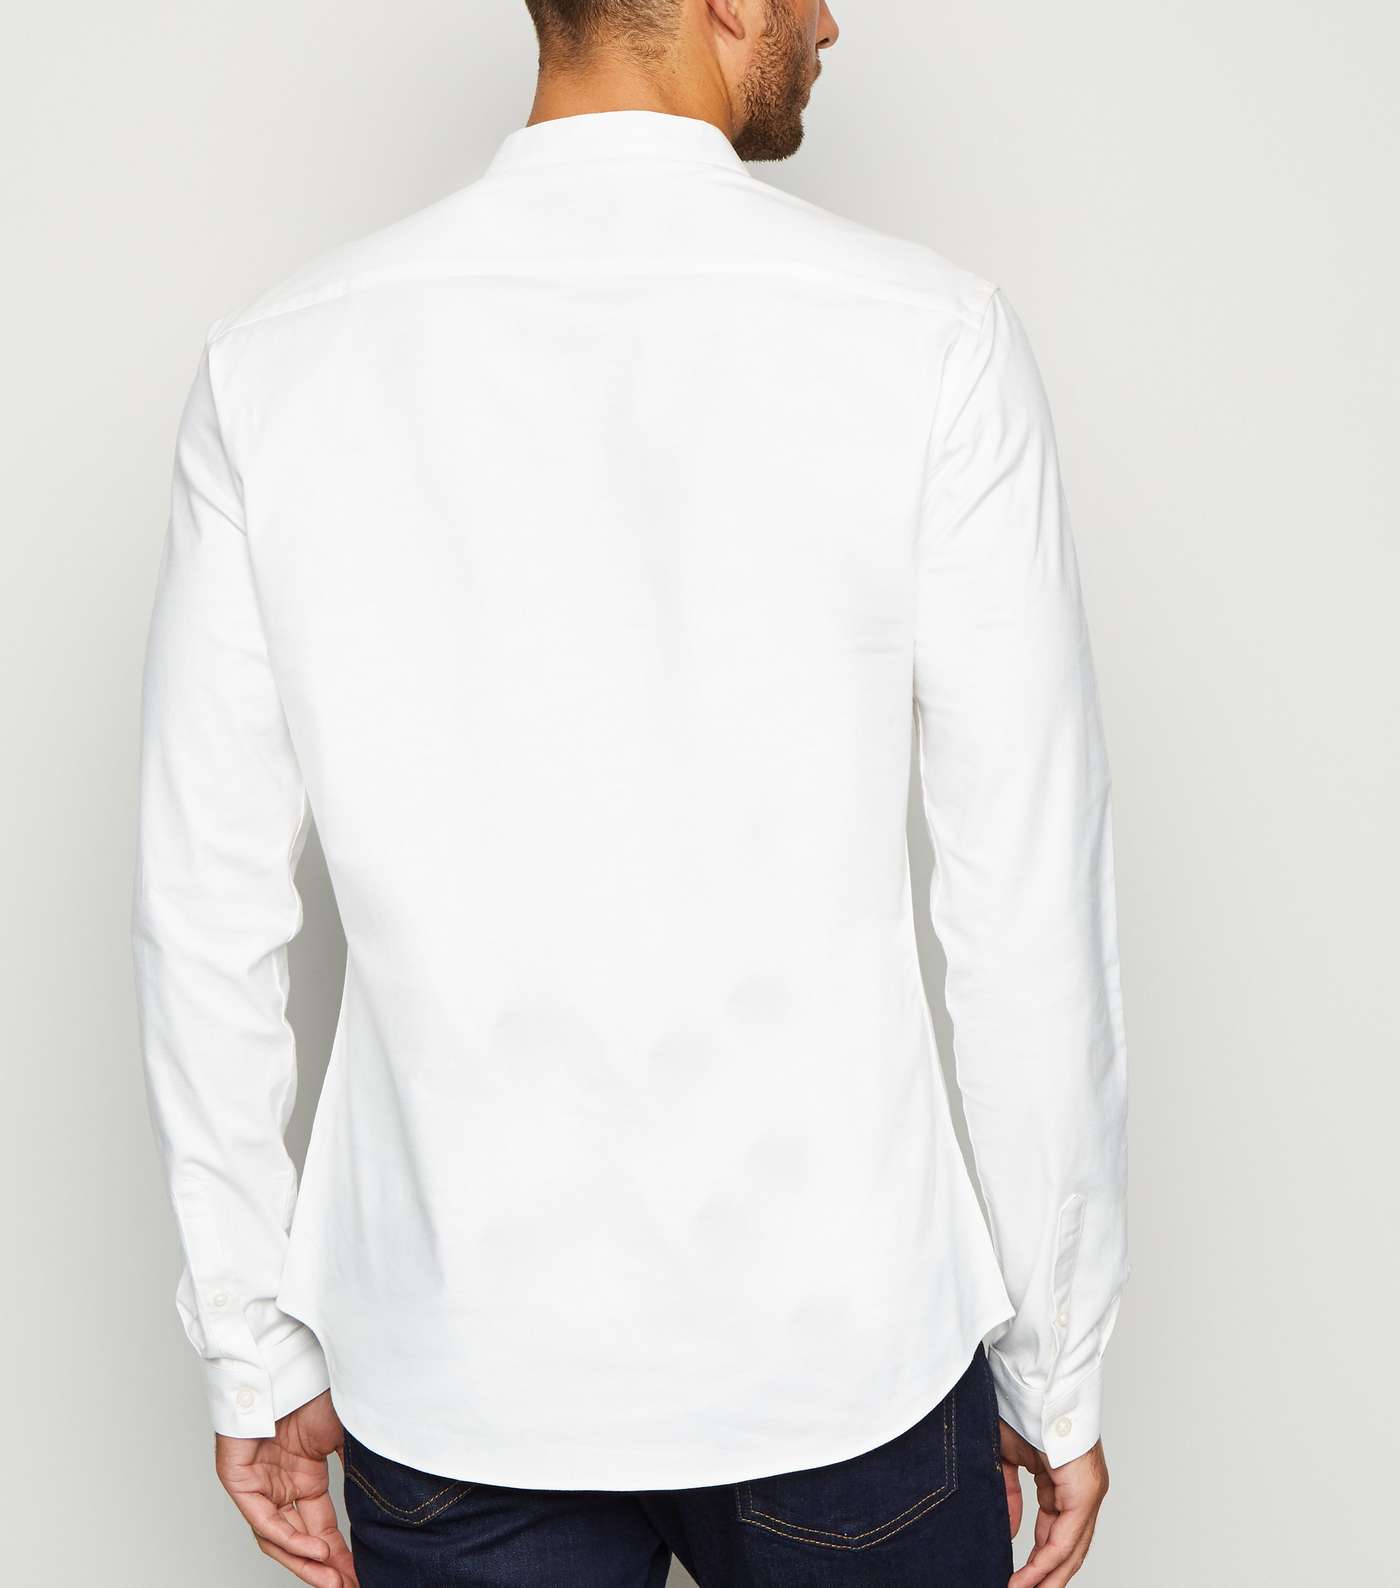 White Muscle Fit Grandad Oxford Shirt Image 3